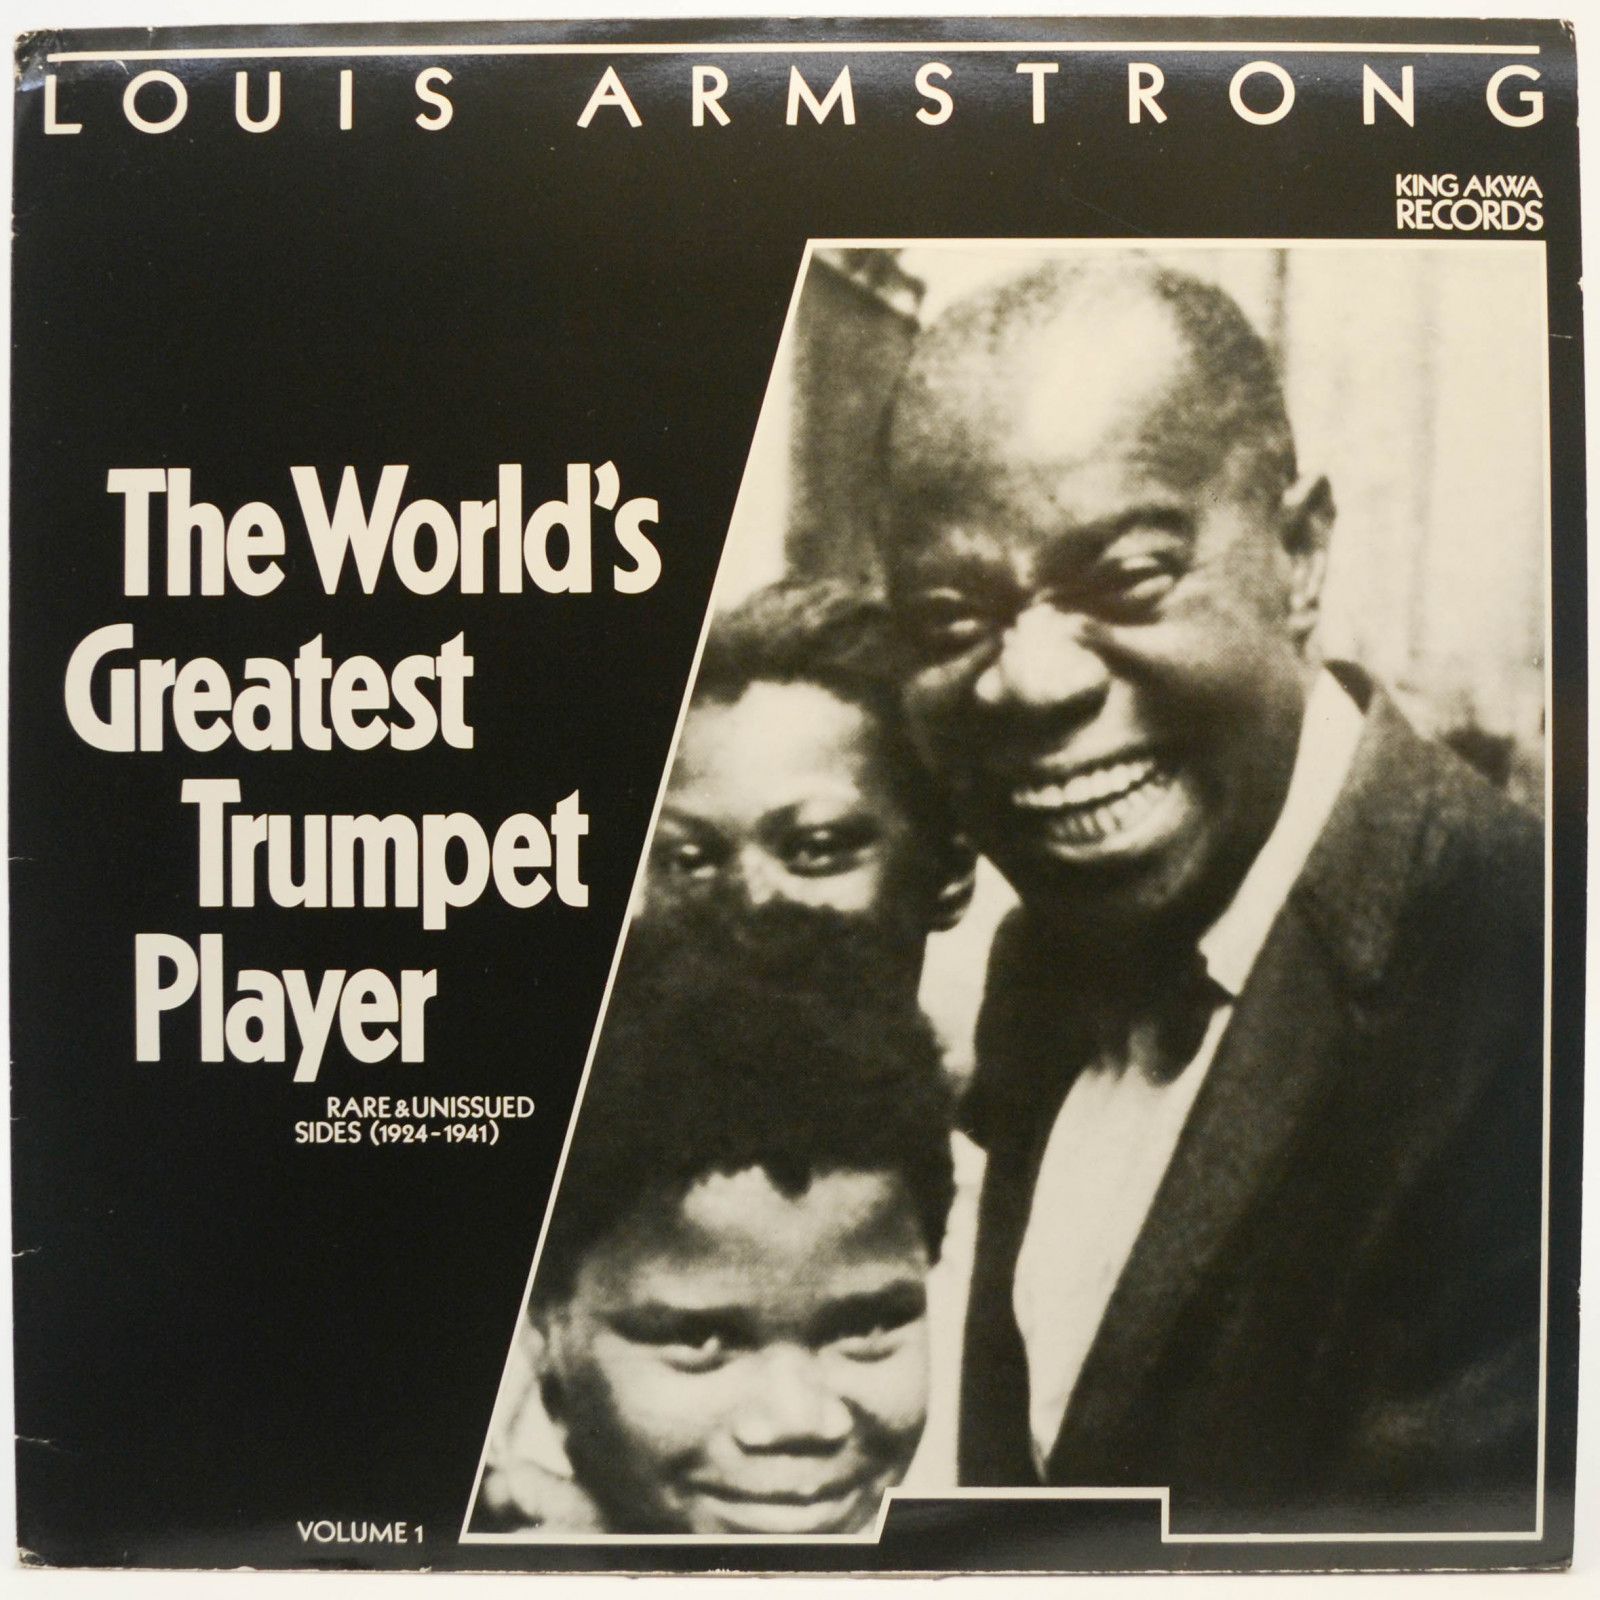 Louis Armstrong — The World's Greatest Trumpet Player (Rare & Unissued Sides 1924/1941), 1985